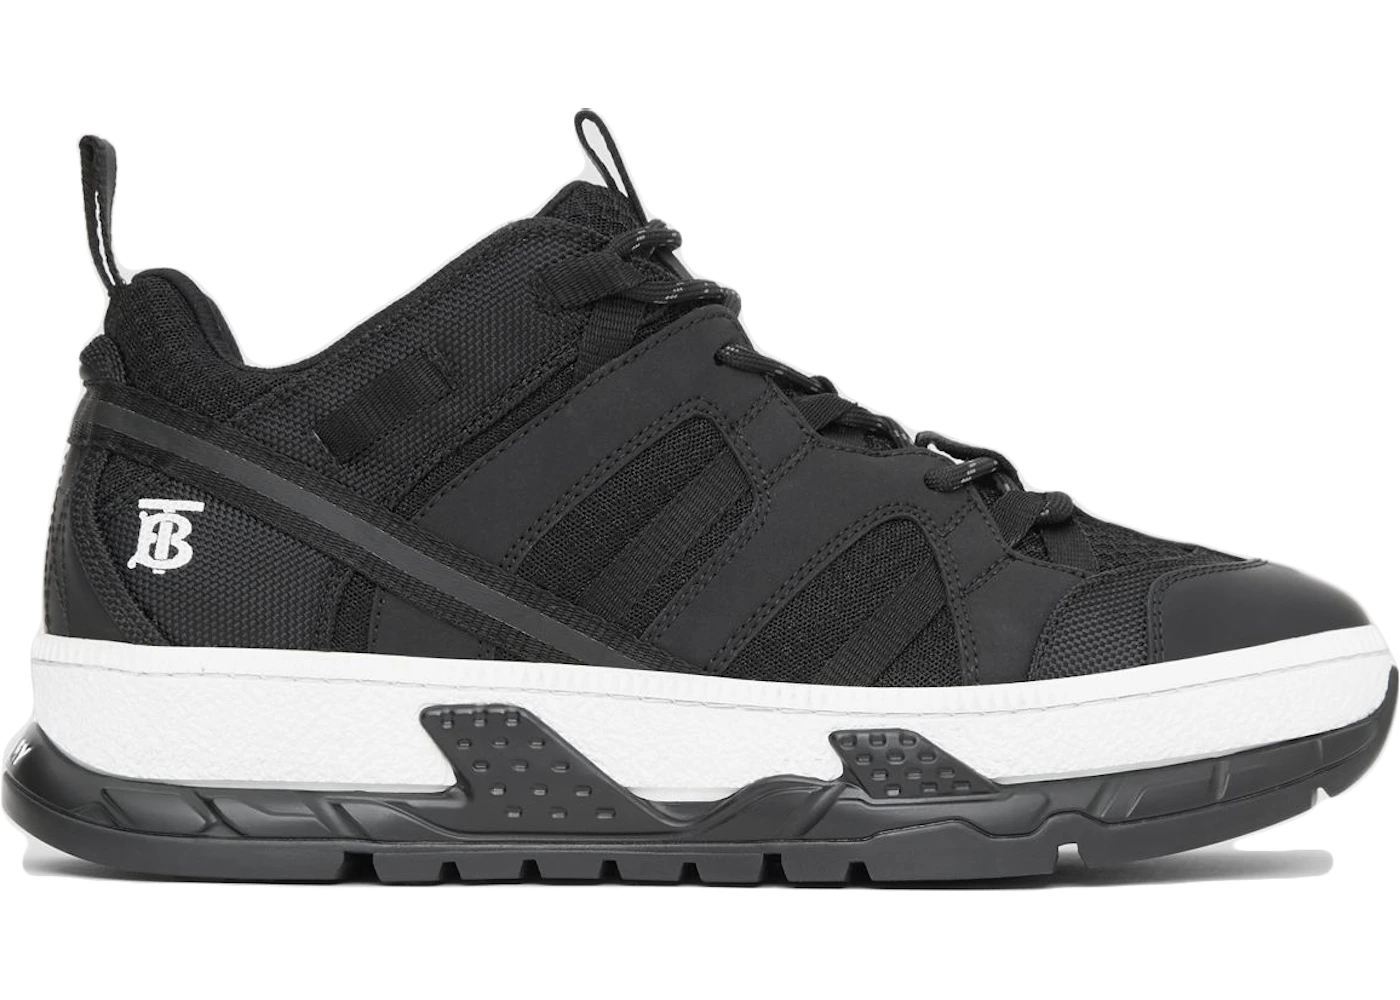 Fusion Footwear: Mesh and Nubuck Union Sneakers by Burberry